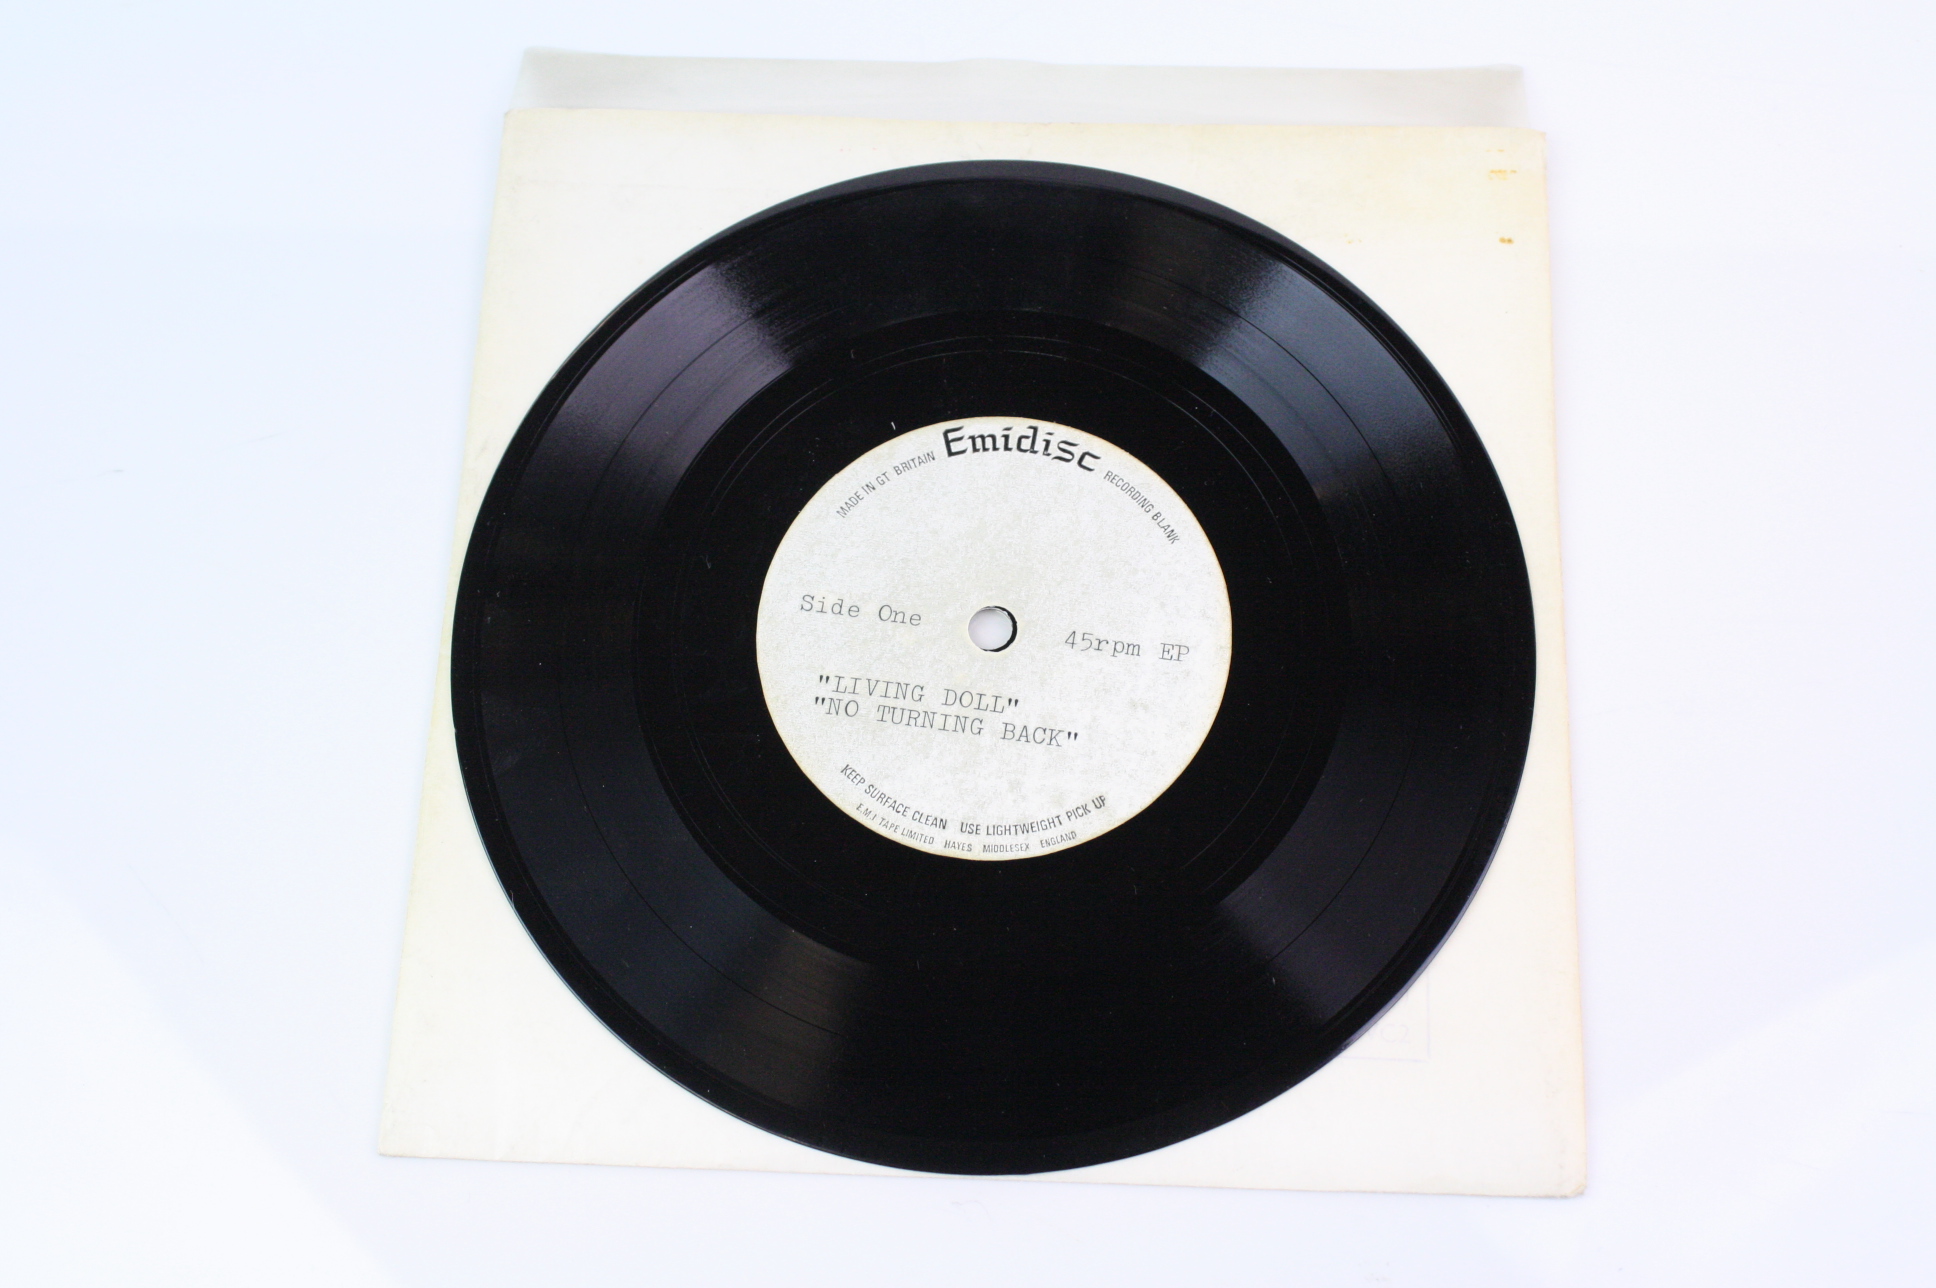 ACETATE - CLIFF RICHARD & THE DRIFTERS (THE SHADOWS) - Image 2 of 4